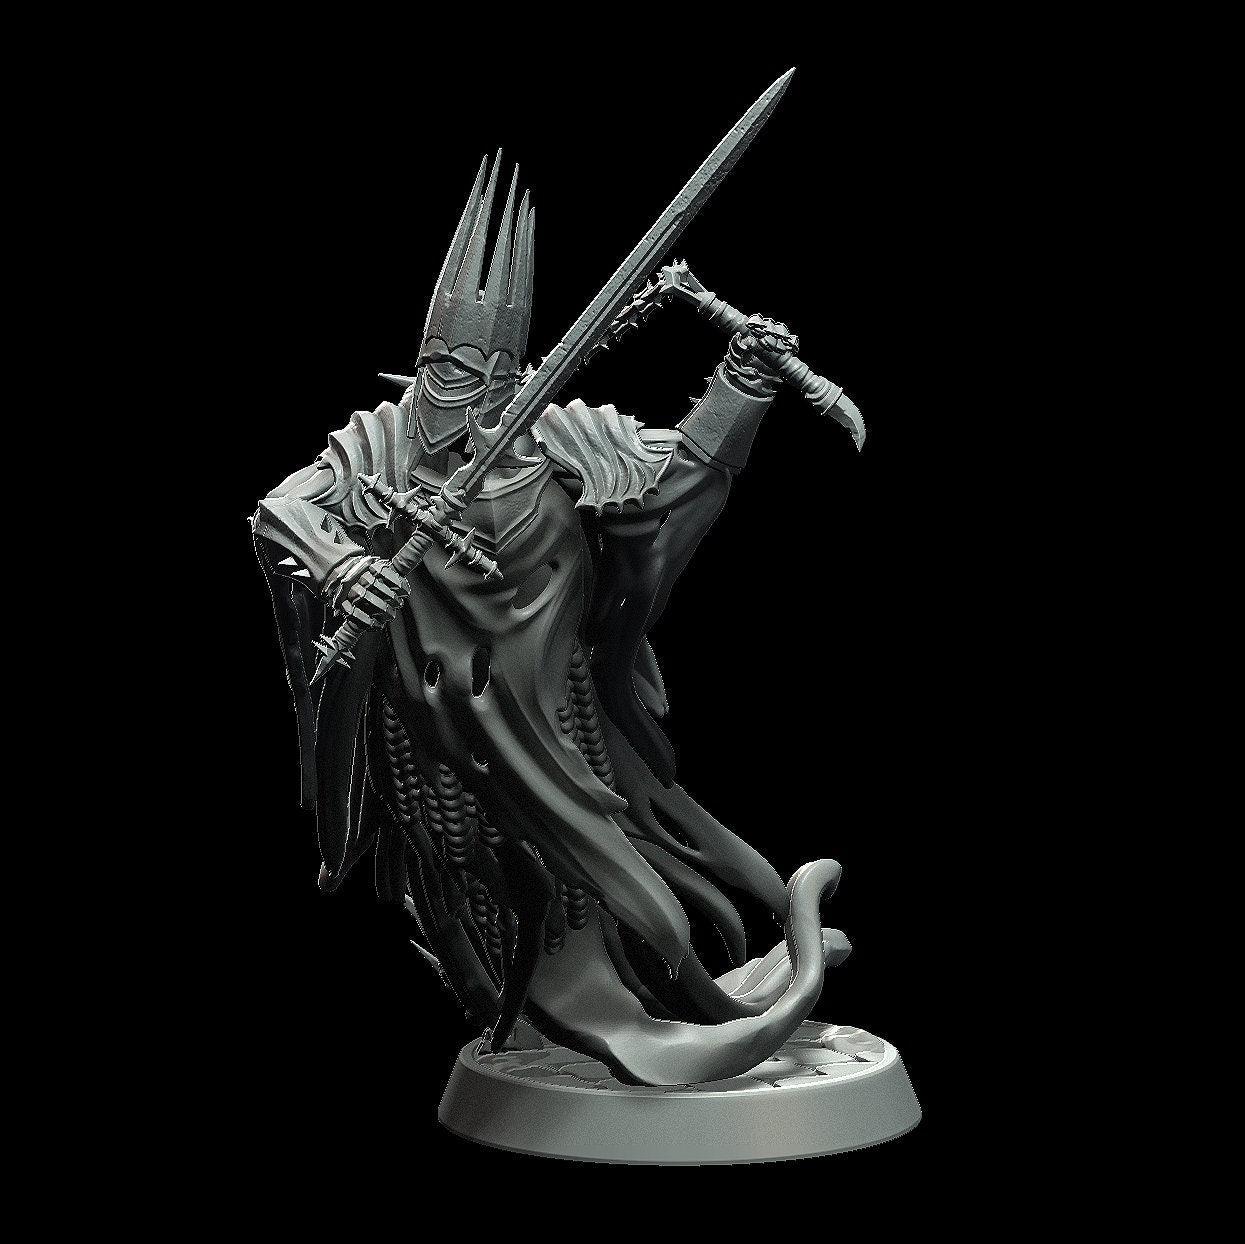 Wraith King Miniature - 3 Poses - 28mm scale Tabletop gaming DnD Miniature Dungeons and Dragons,dnd 5e - Plague Miniatures shop for DnD Miniatures